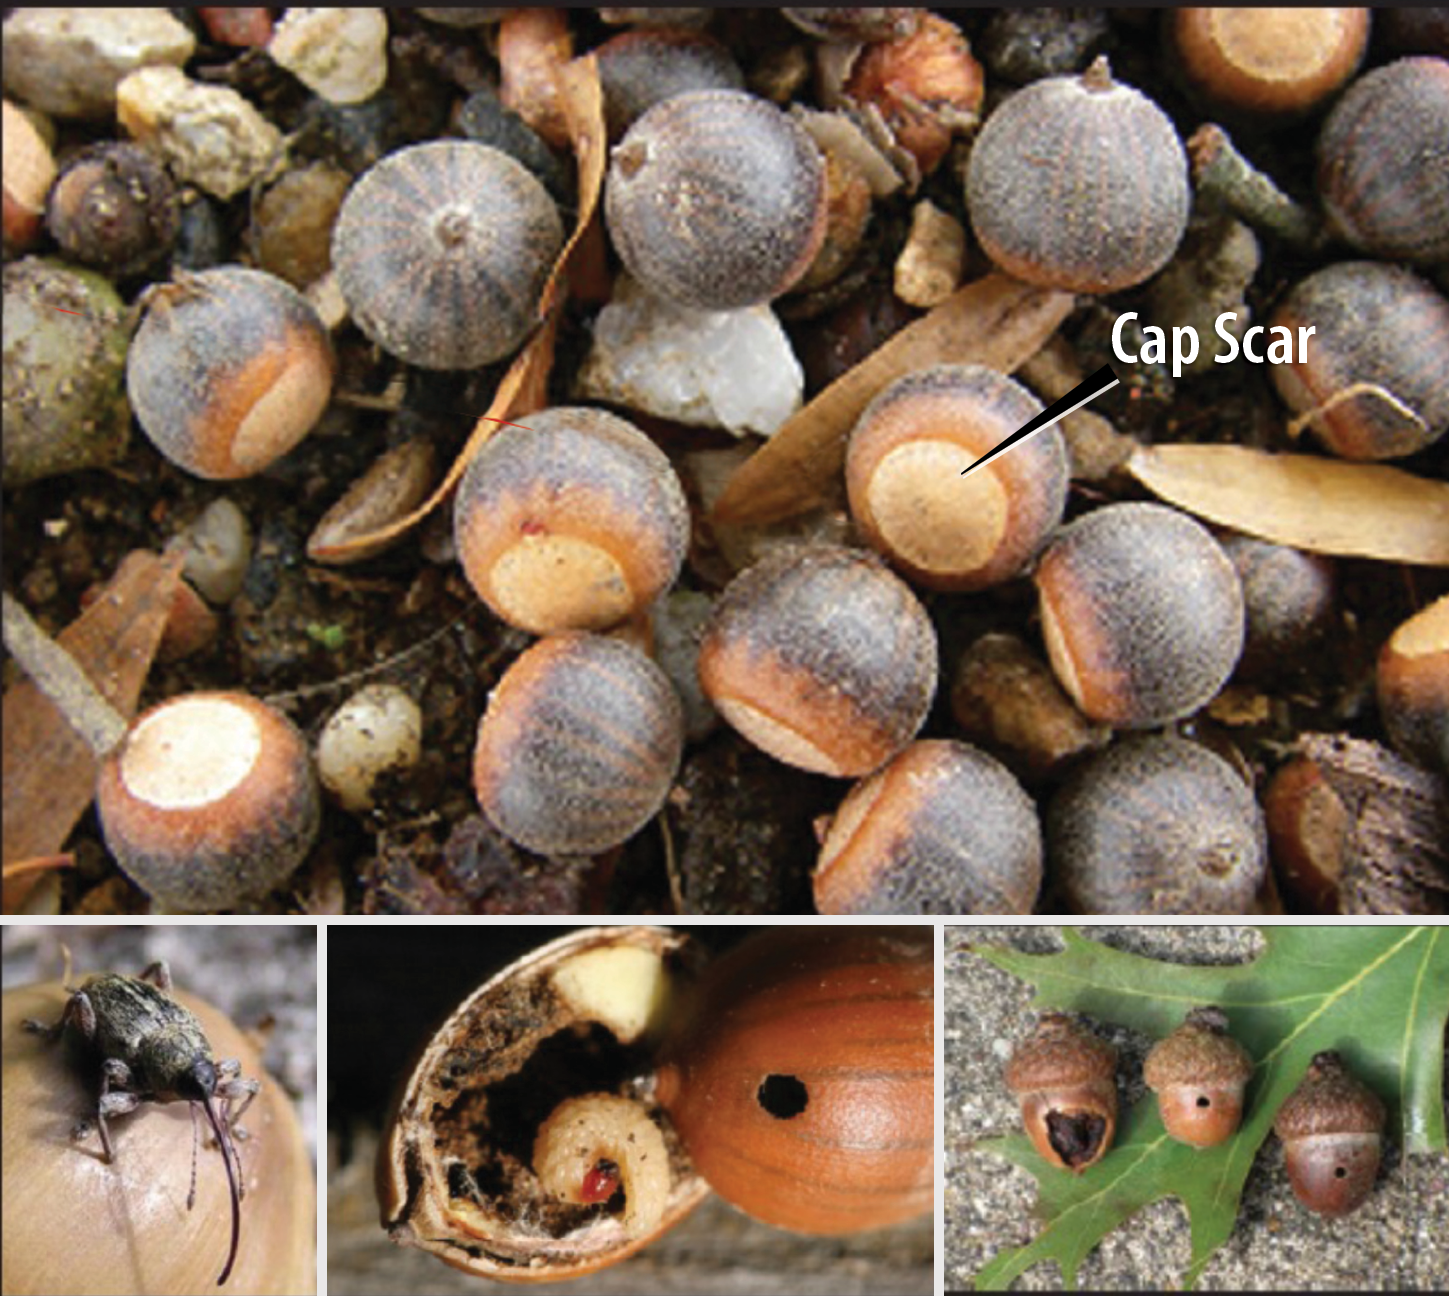 Composite image of many acorns with an arrow pointing to the cap scar of one. The cap scar is a white circle on the top of the acorn. Other images show an insect with a very long, thin snout; an acorn with a small hole on the outside and a curved, legless, white grub inside; and two acorns with small holes and one with a large portion of the shell missing.